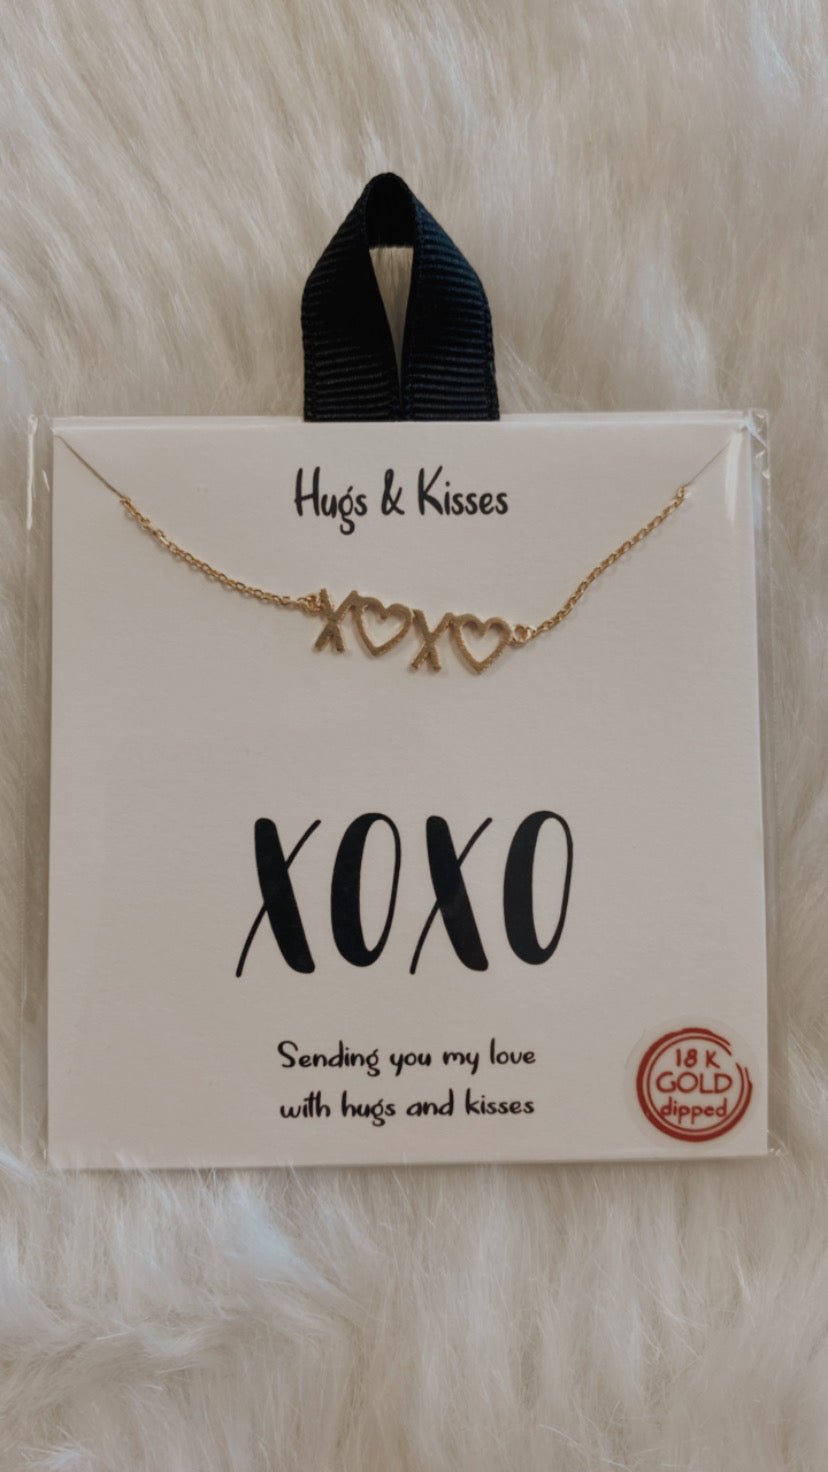 Hugs and Kisses Card Necklace